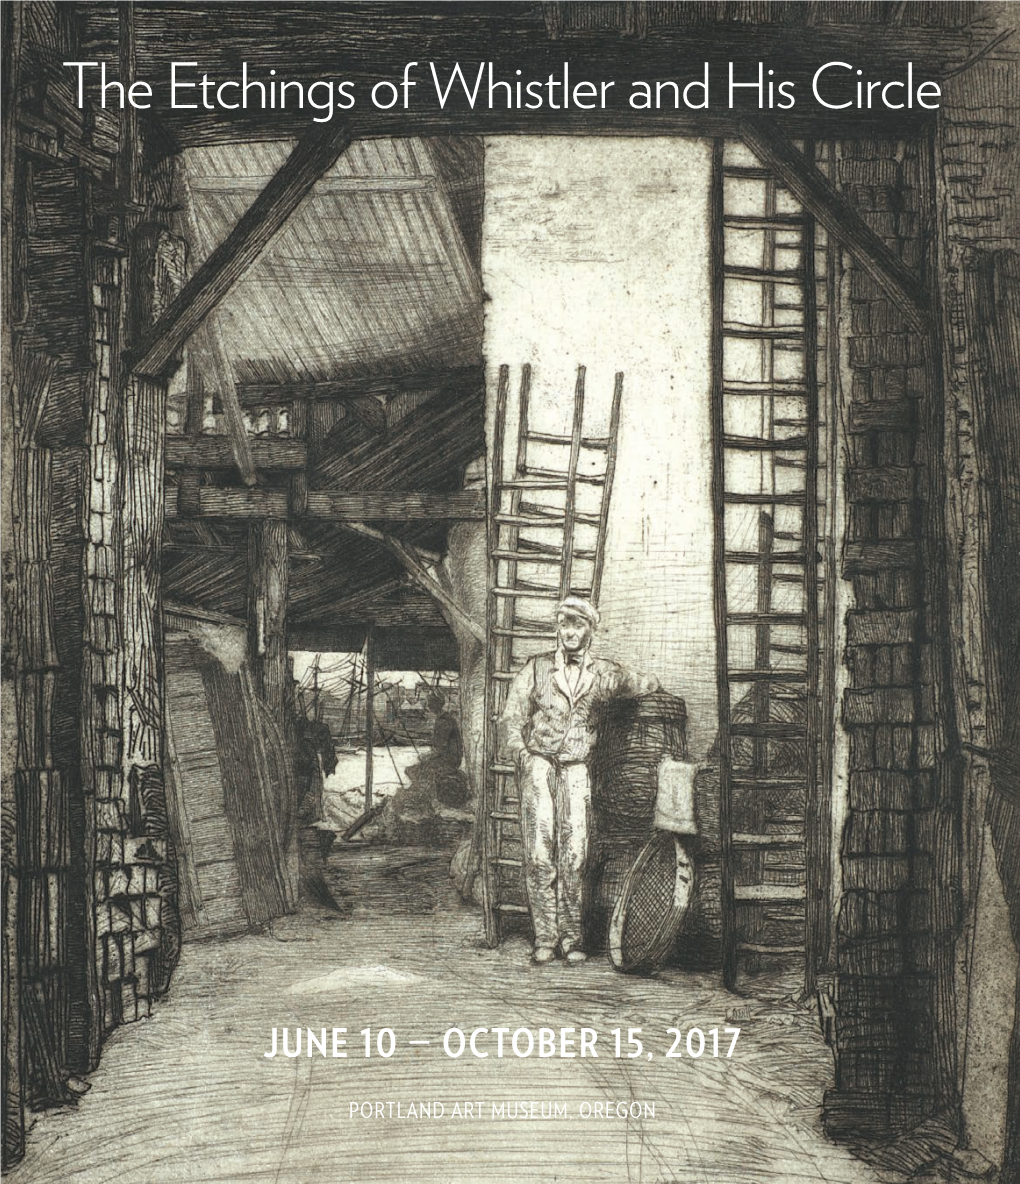 The Etchings of Whistler and His Circle